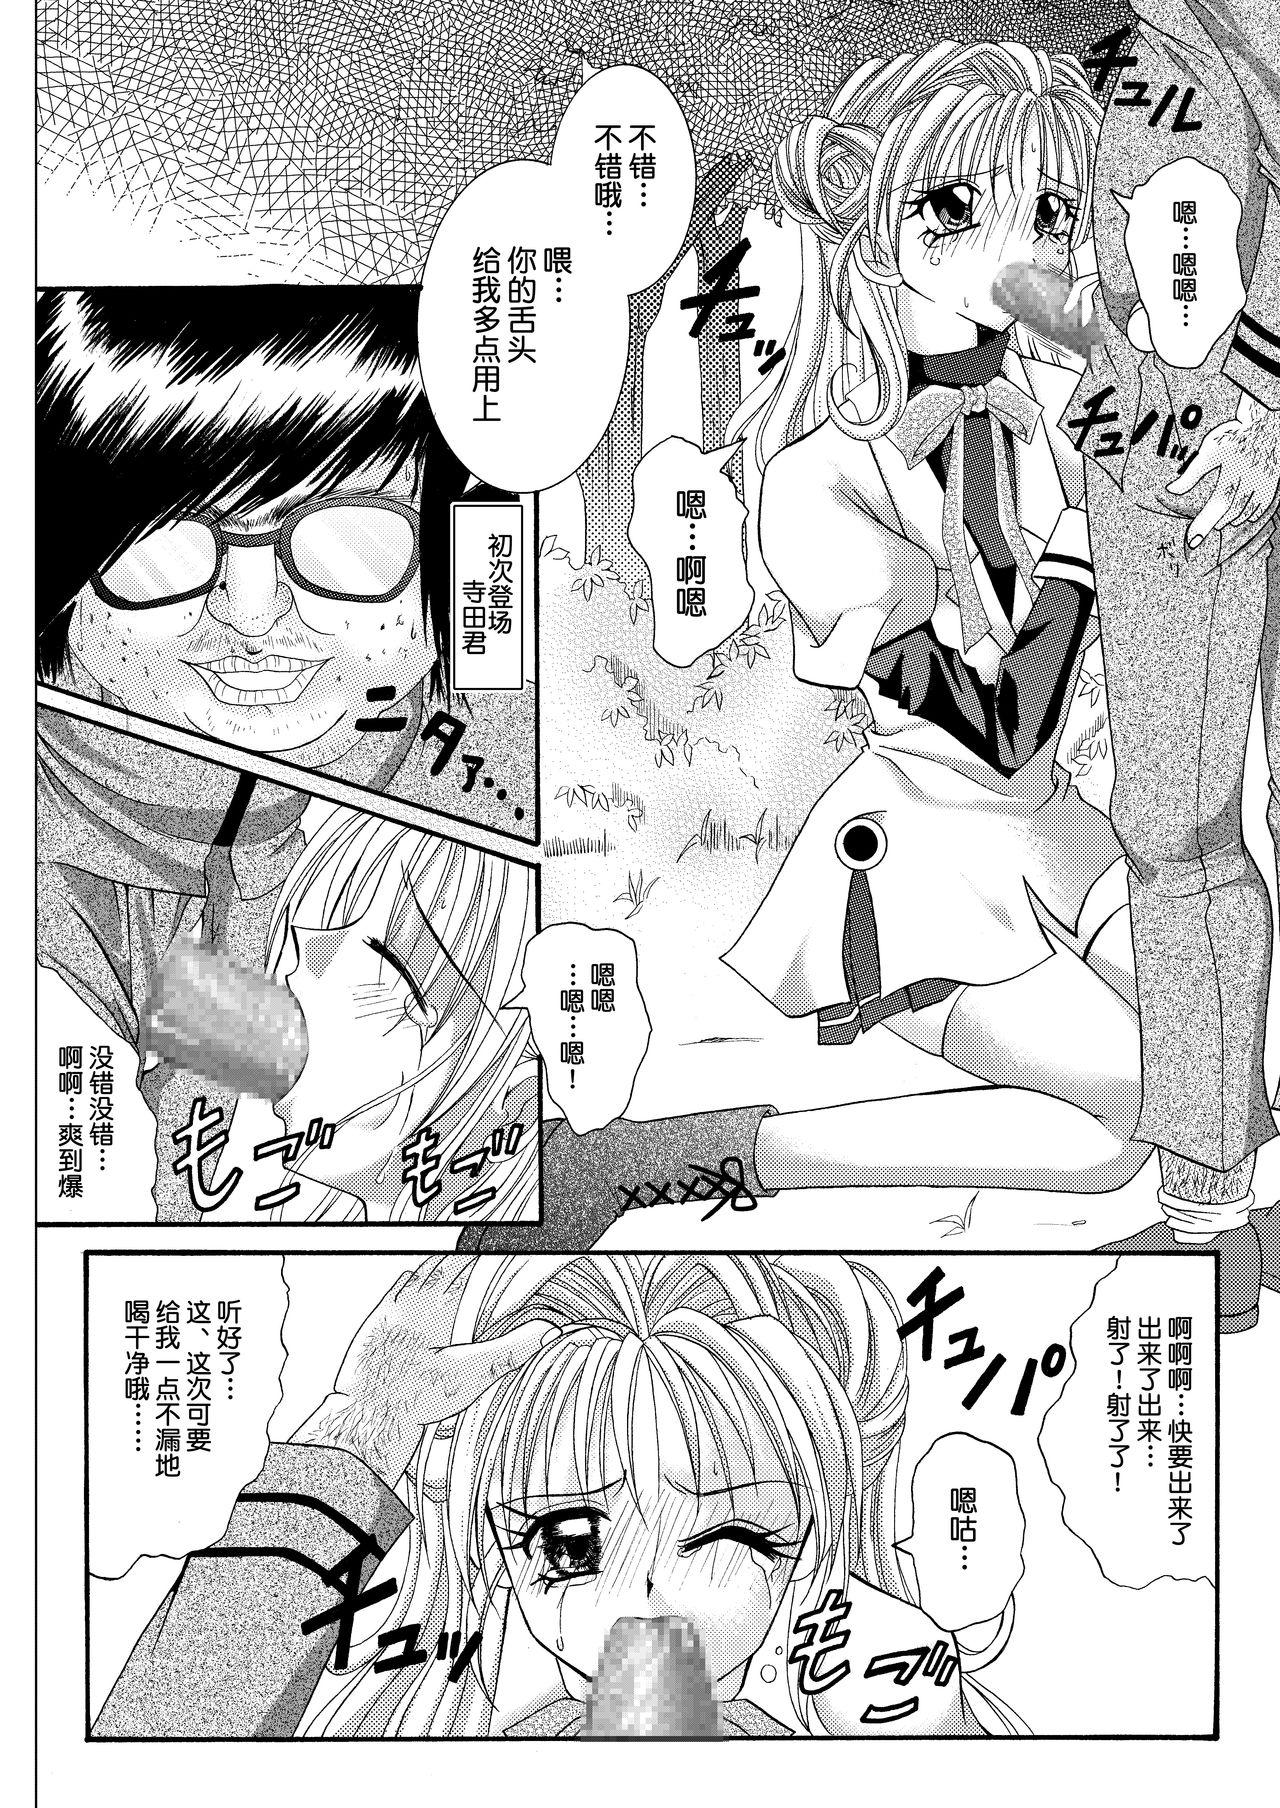 Assfucked Rogue Spear 208 Download edition - Kamikaze kaitou jeanne 19yo - Page 6